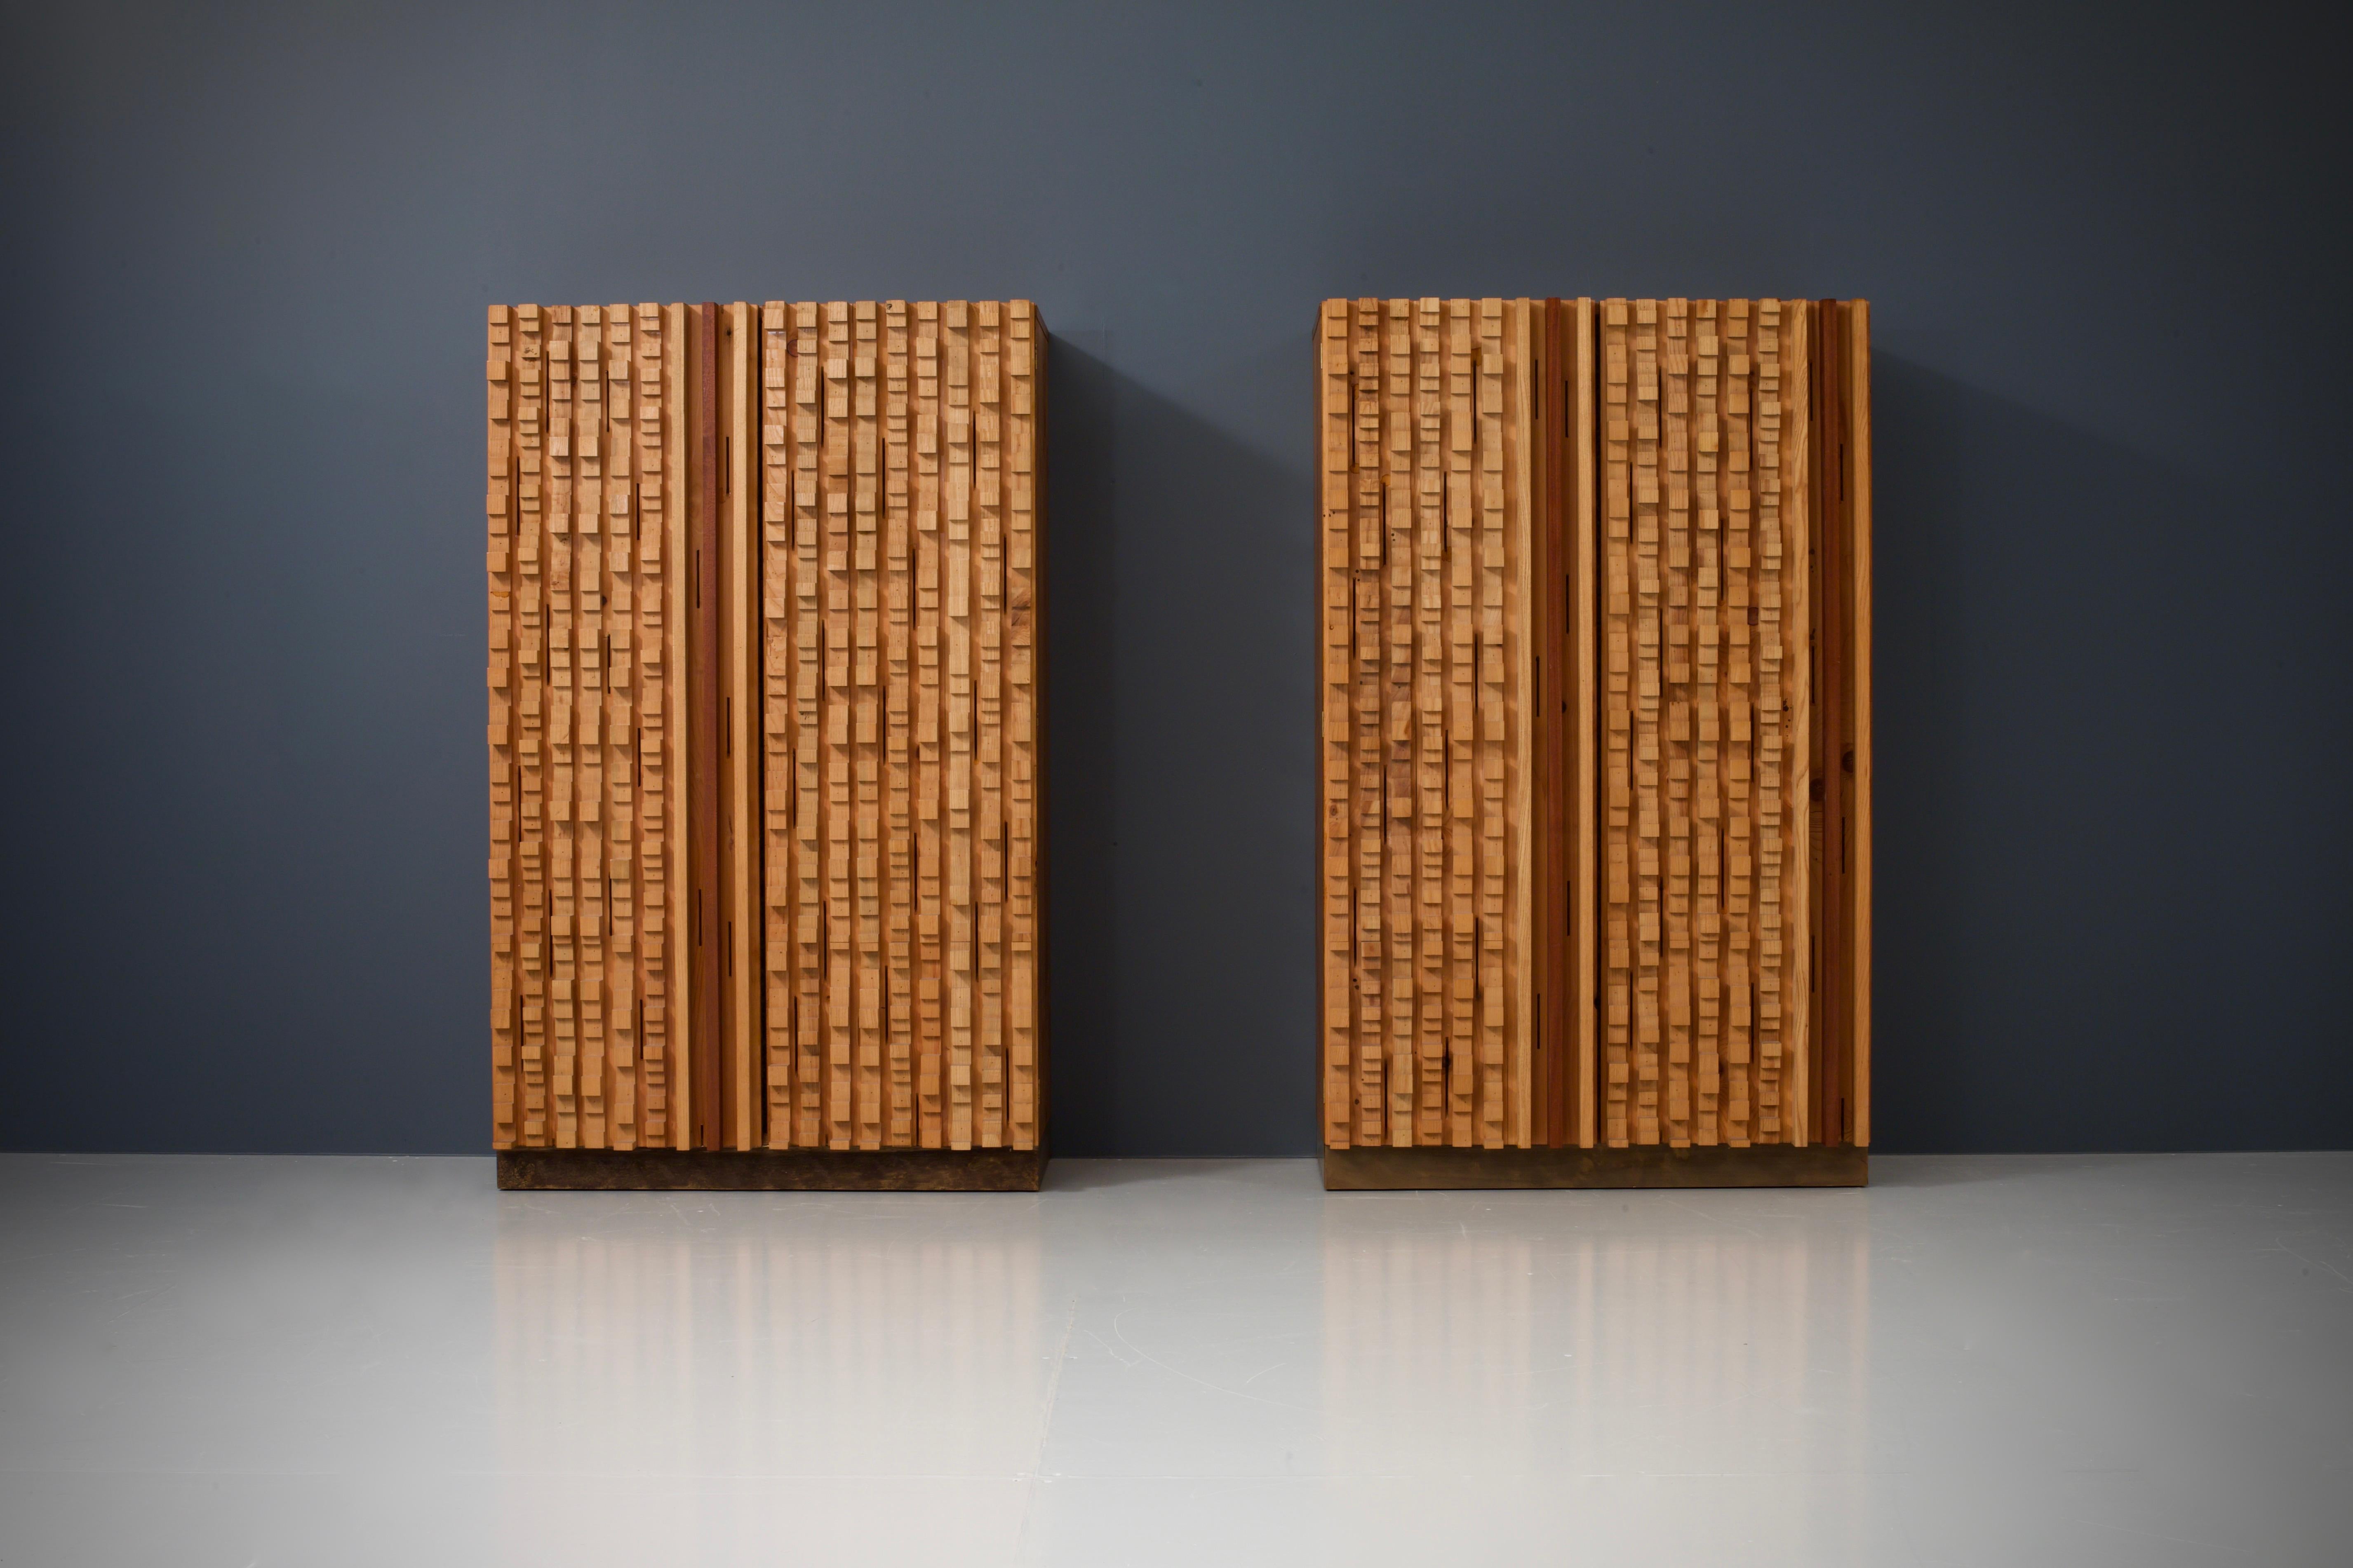 Set of 3 Wall Panels and 2 Cabinets by Stefano d'Amico, Italy, 1975 For Sale 5